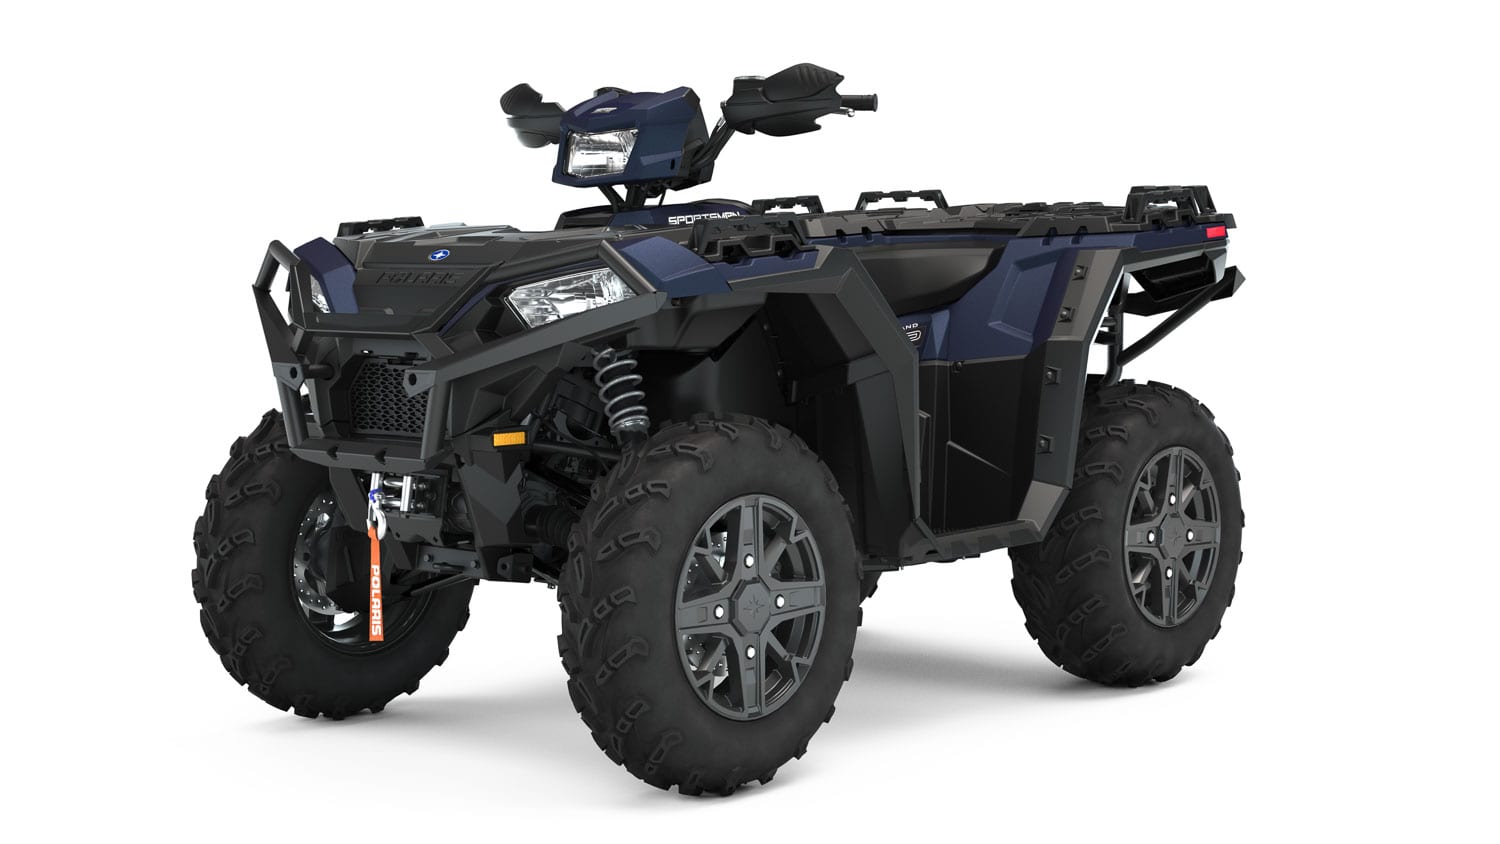 All-New 2020 RZR and Sportsman Limited-Edition Models